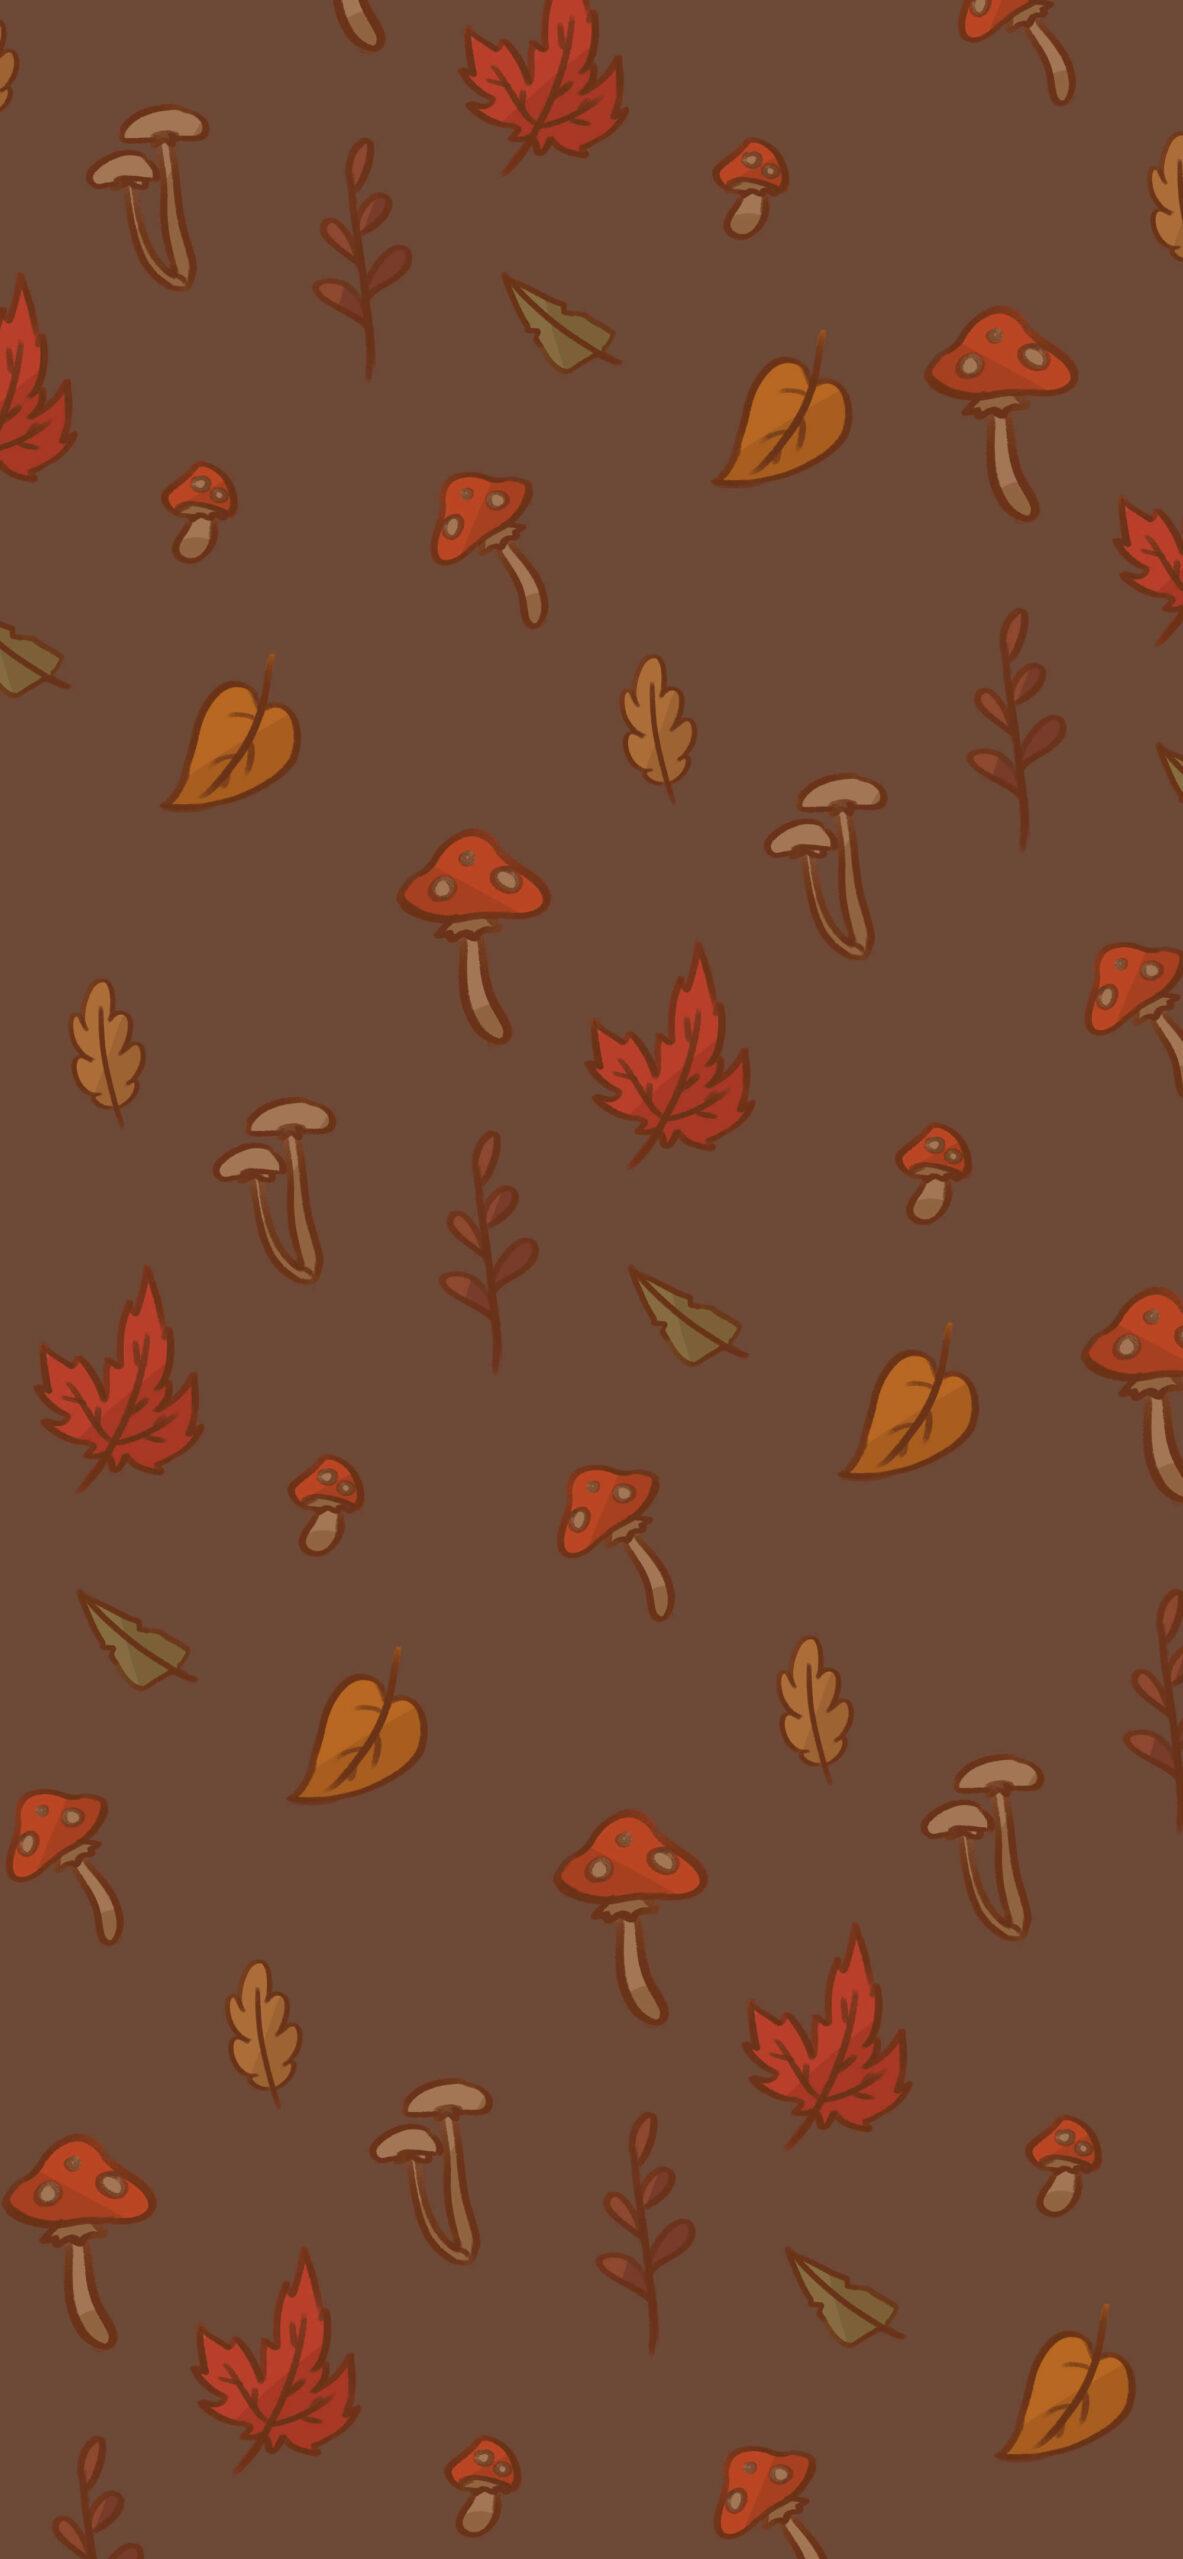 Tan Fall Aesthetic Wallpapers for iPhone   Autumn Wallpaper For Phone